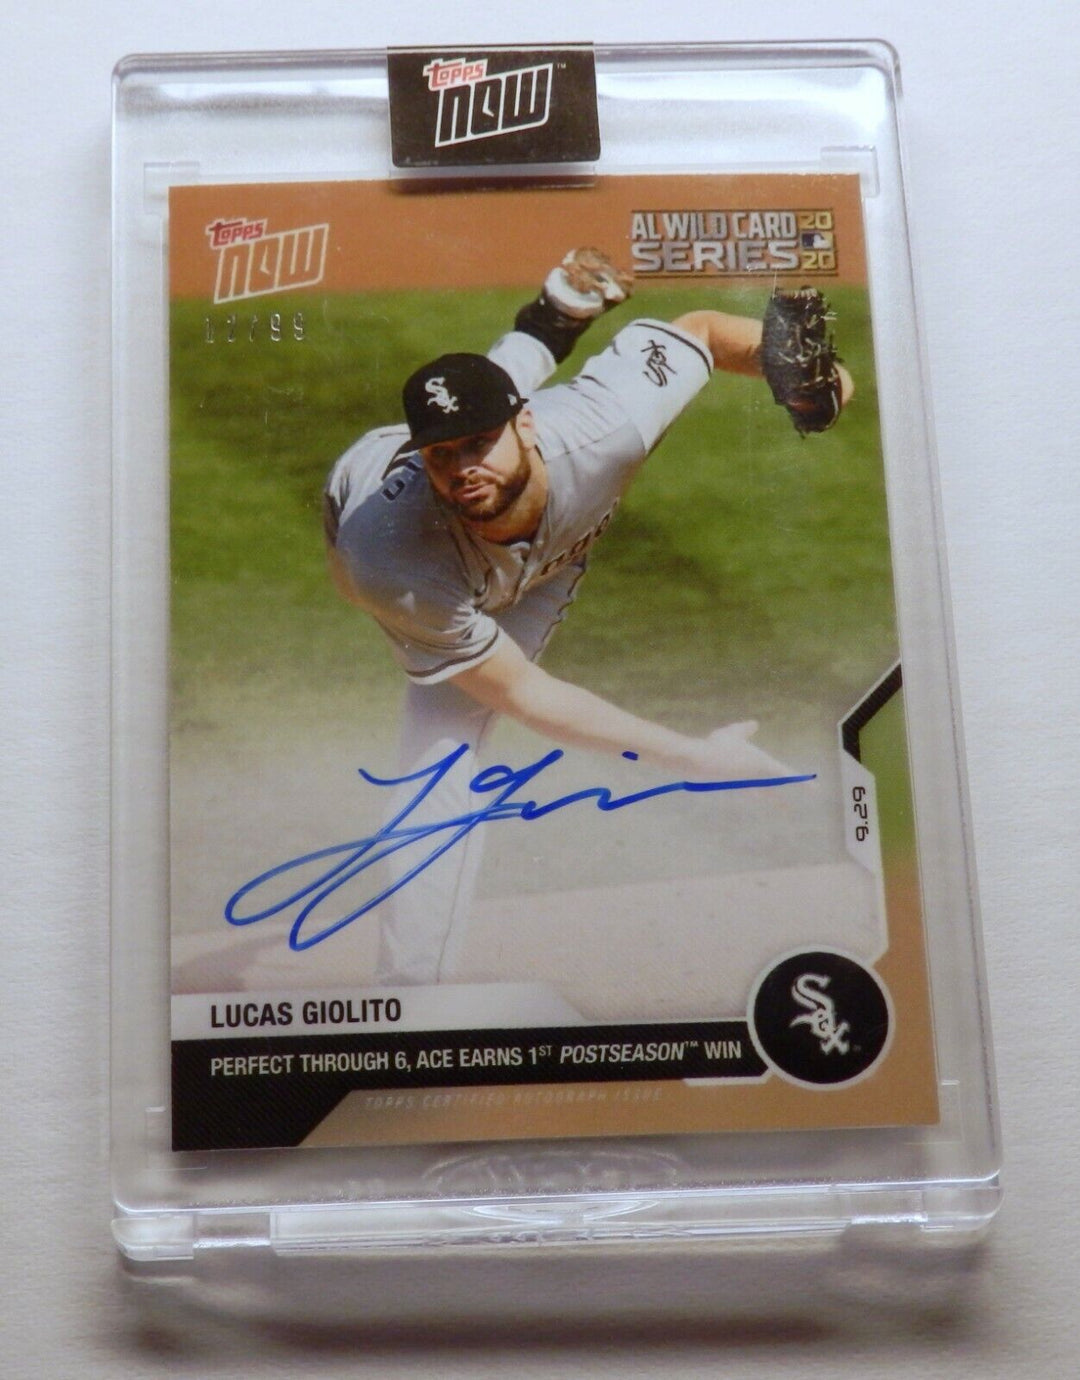 LUCAS GIOLITO SIGNED 1st POSTSEASON WIN TOPPS NOW CERTIFIED AUTOGRAPH CARD #327A Image 3